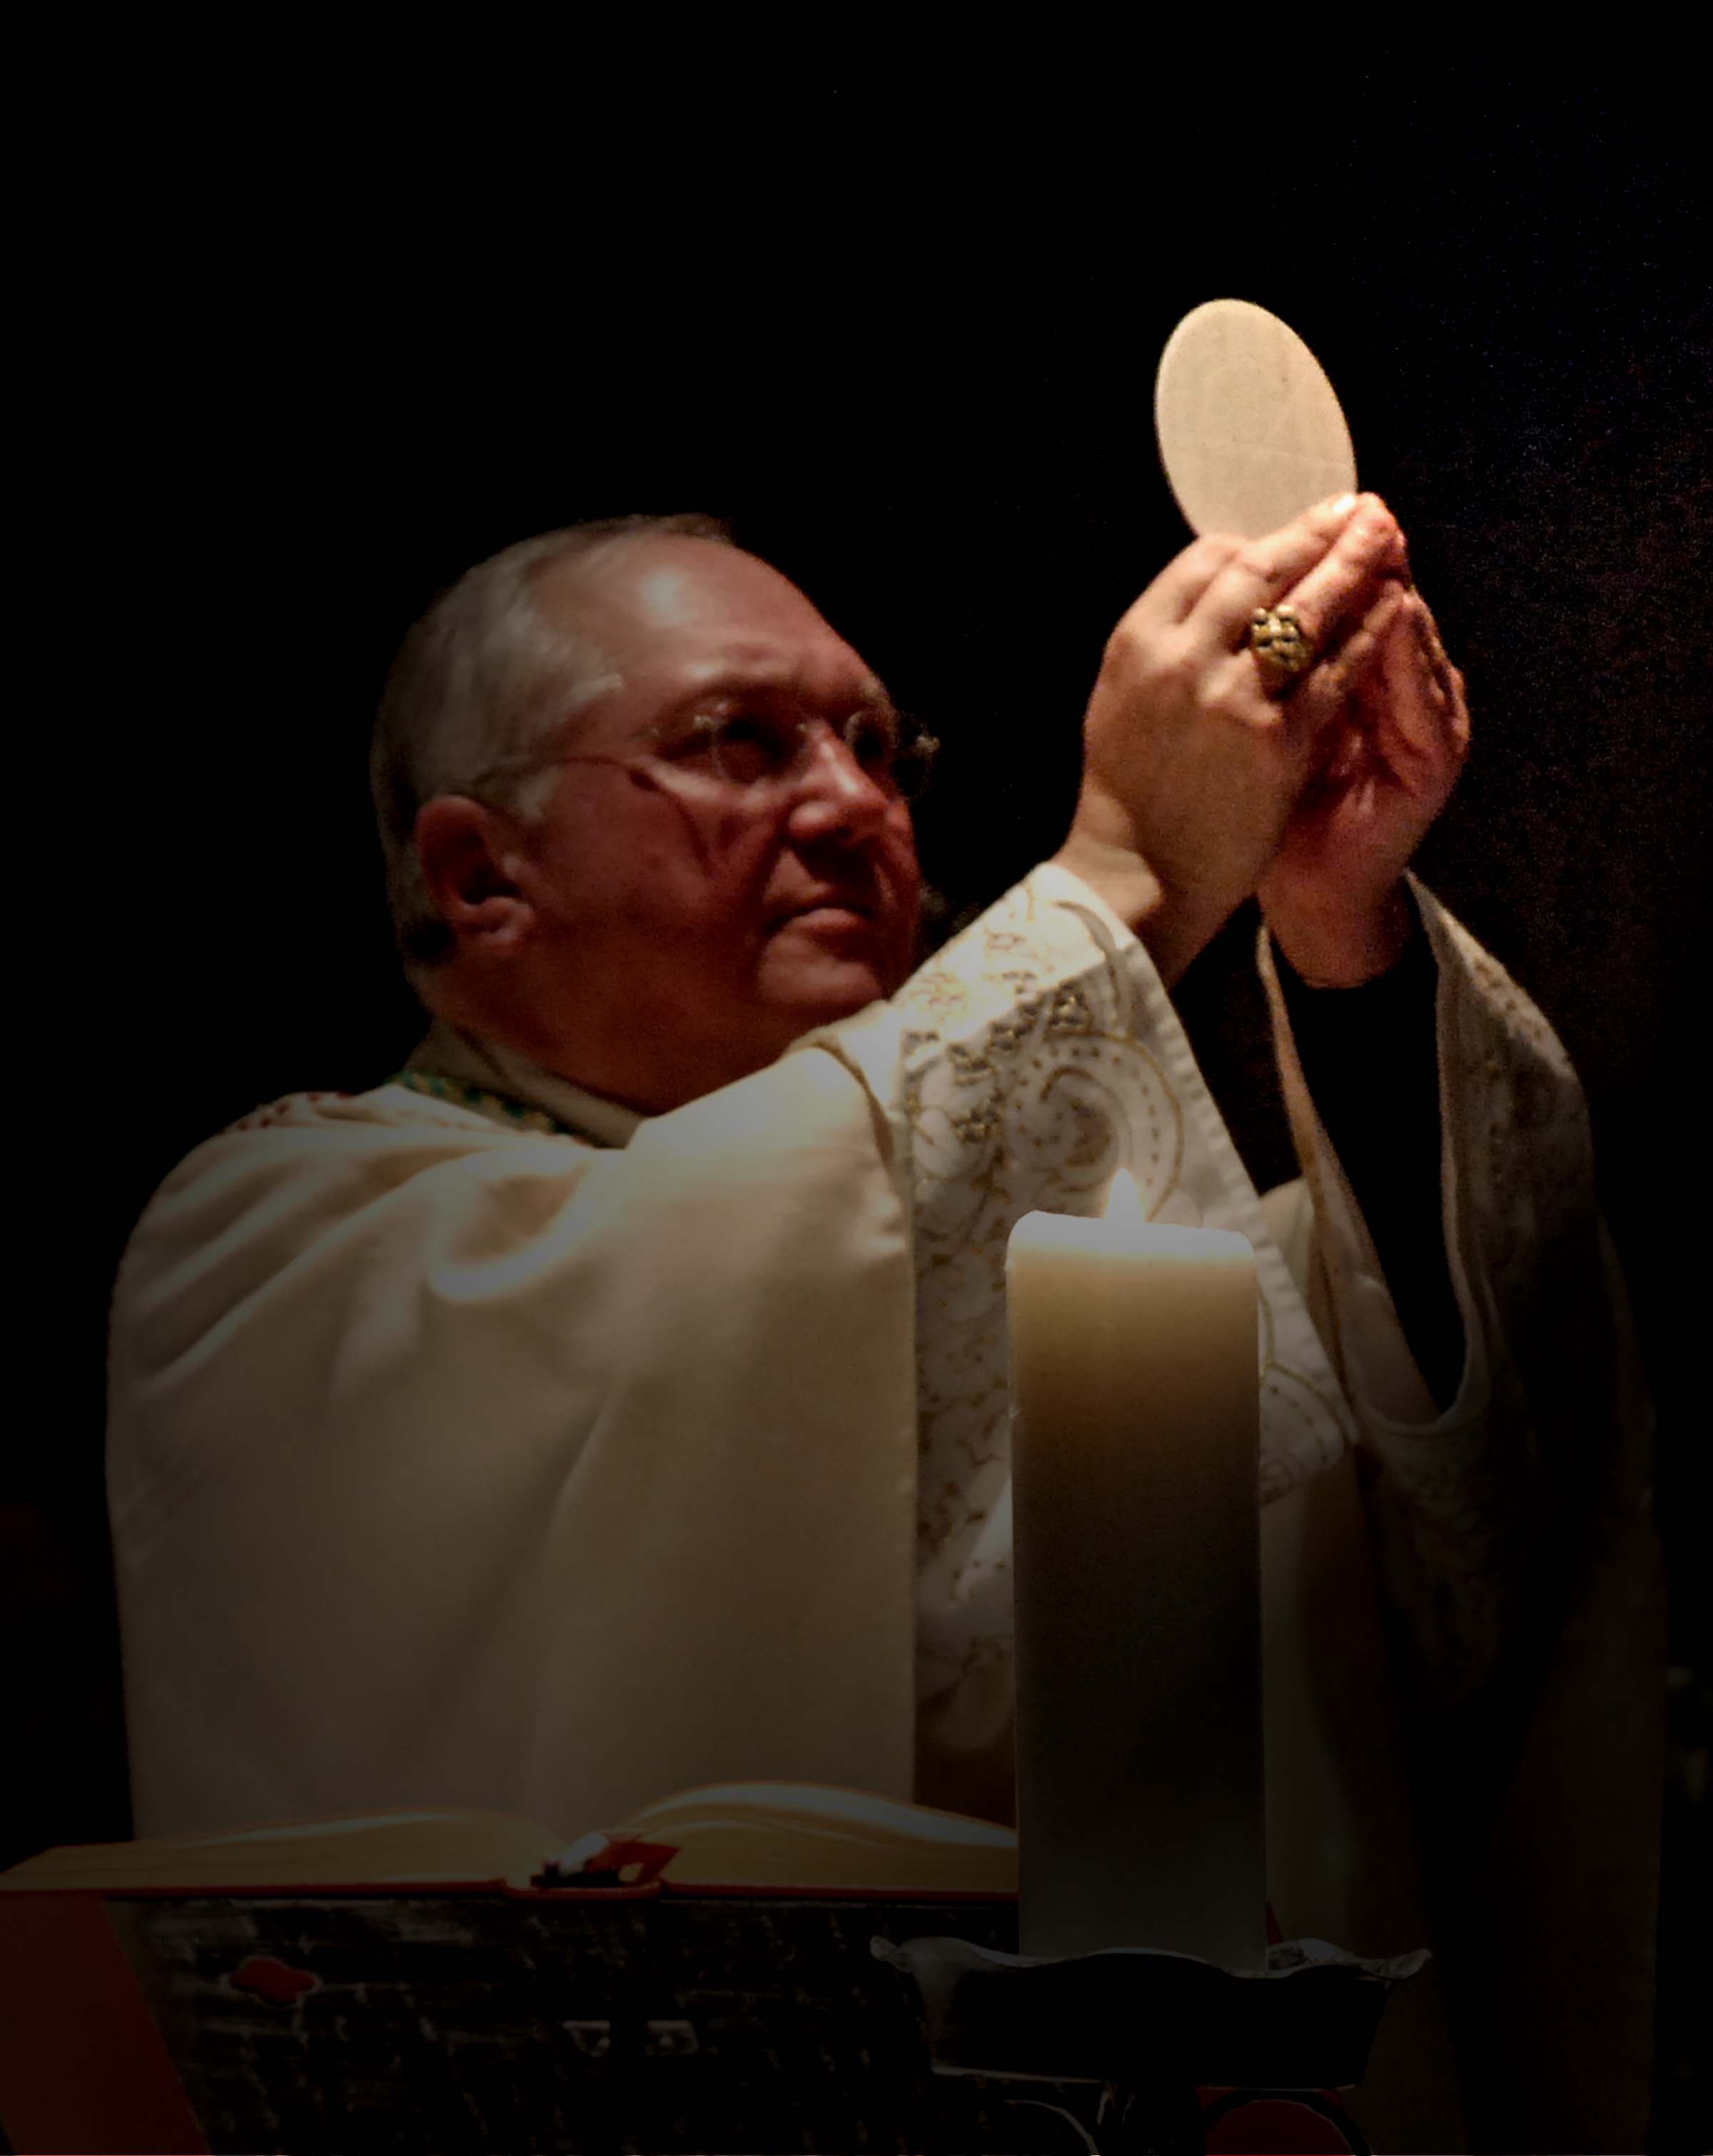 Sweet Sacrament, we Thee adore!